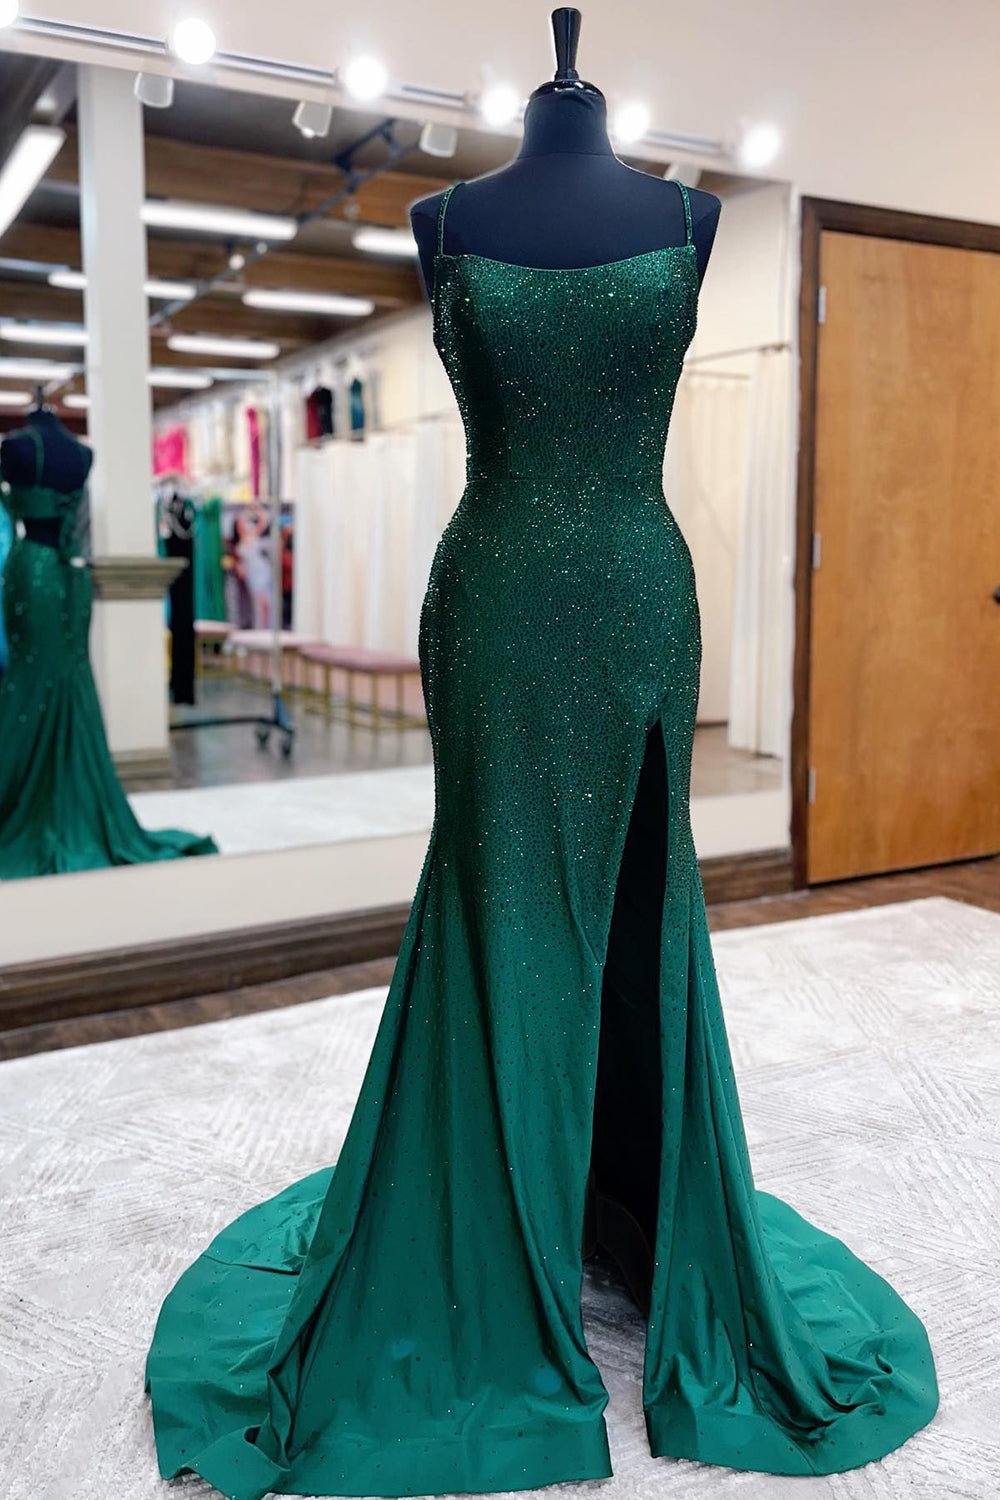 Mermaid Spaghettti Straps Dark Green Sequins Long Corset Prom Dress with Split Front Gowns, Party Dress Styling Ideas